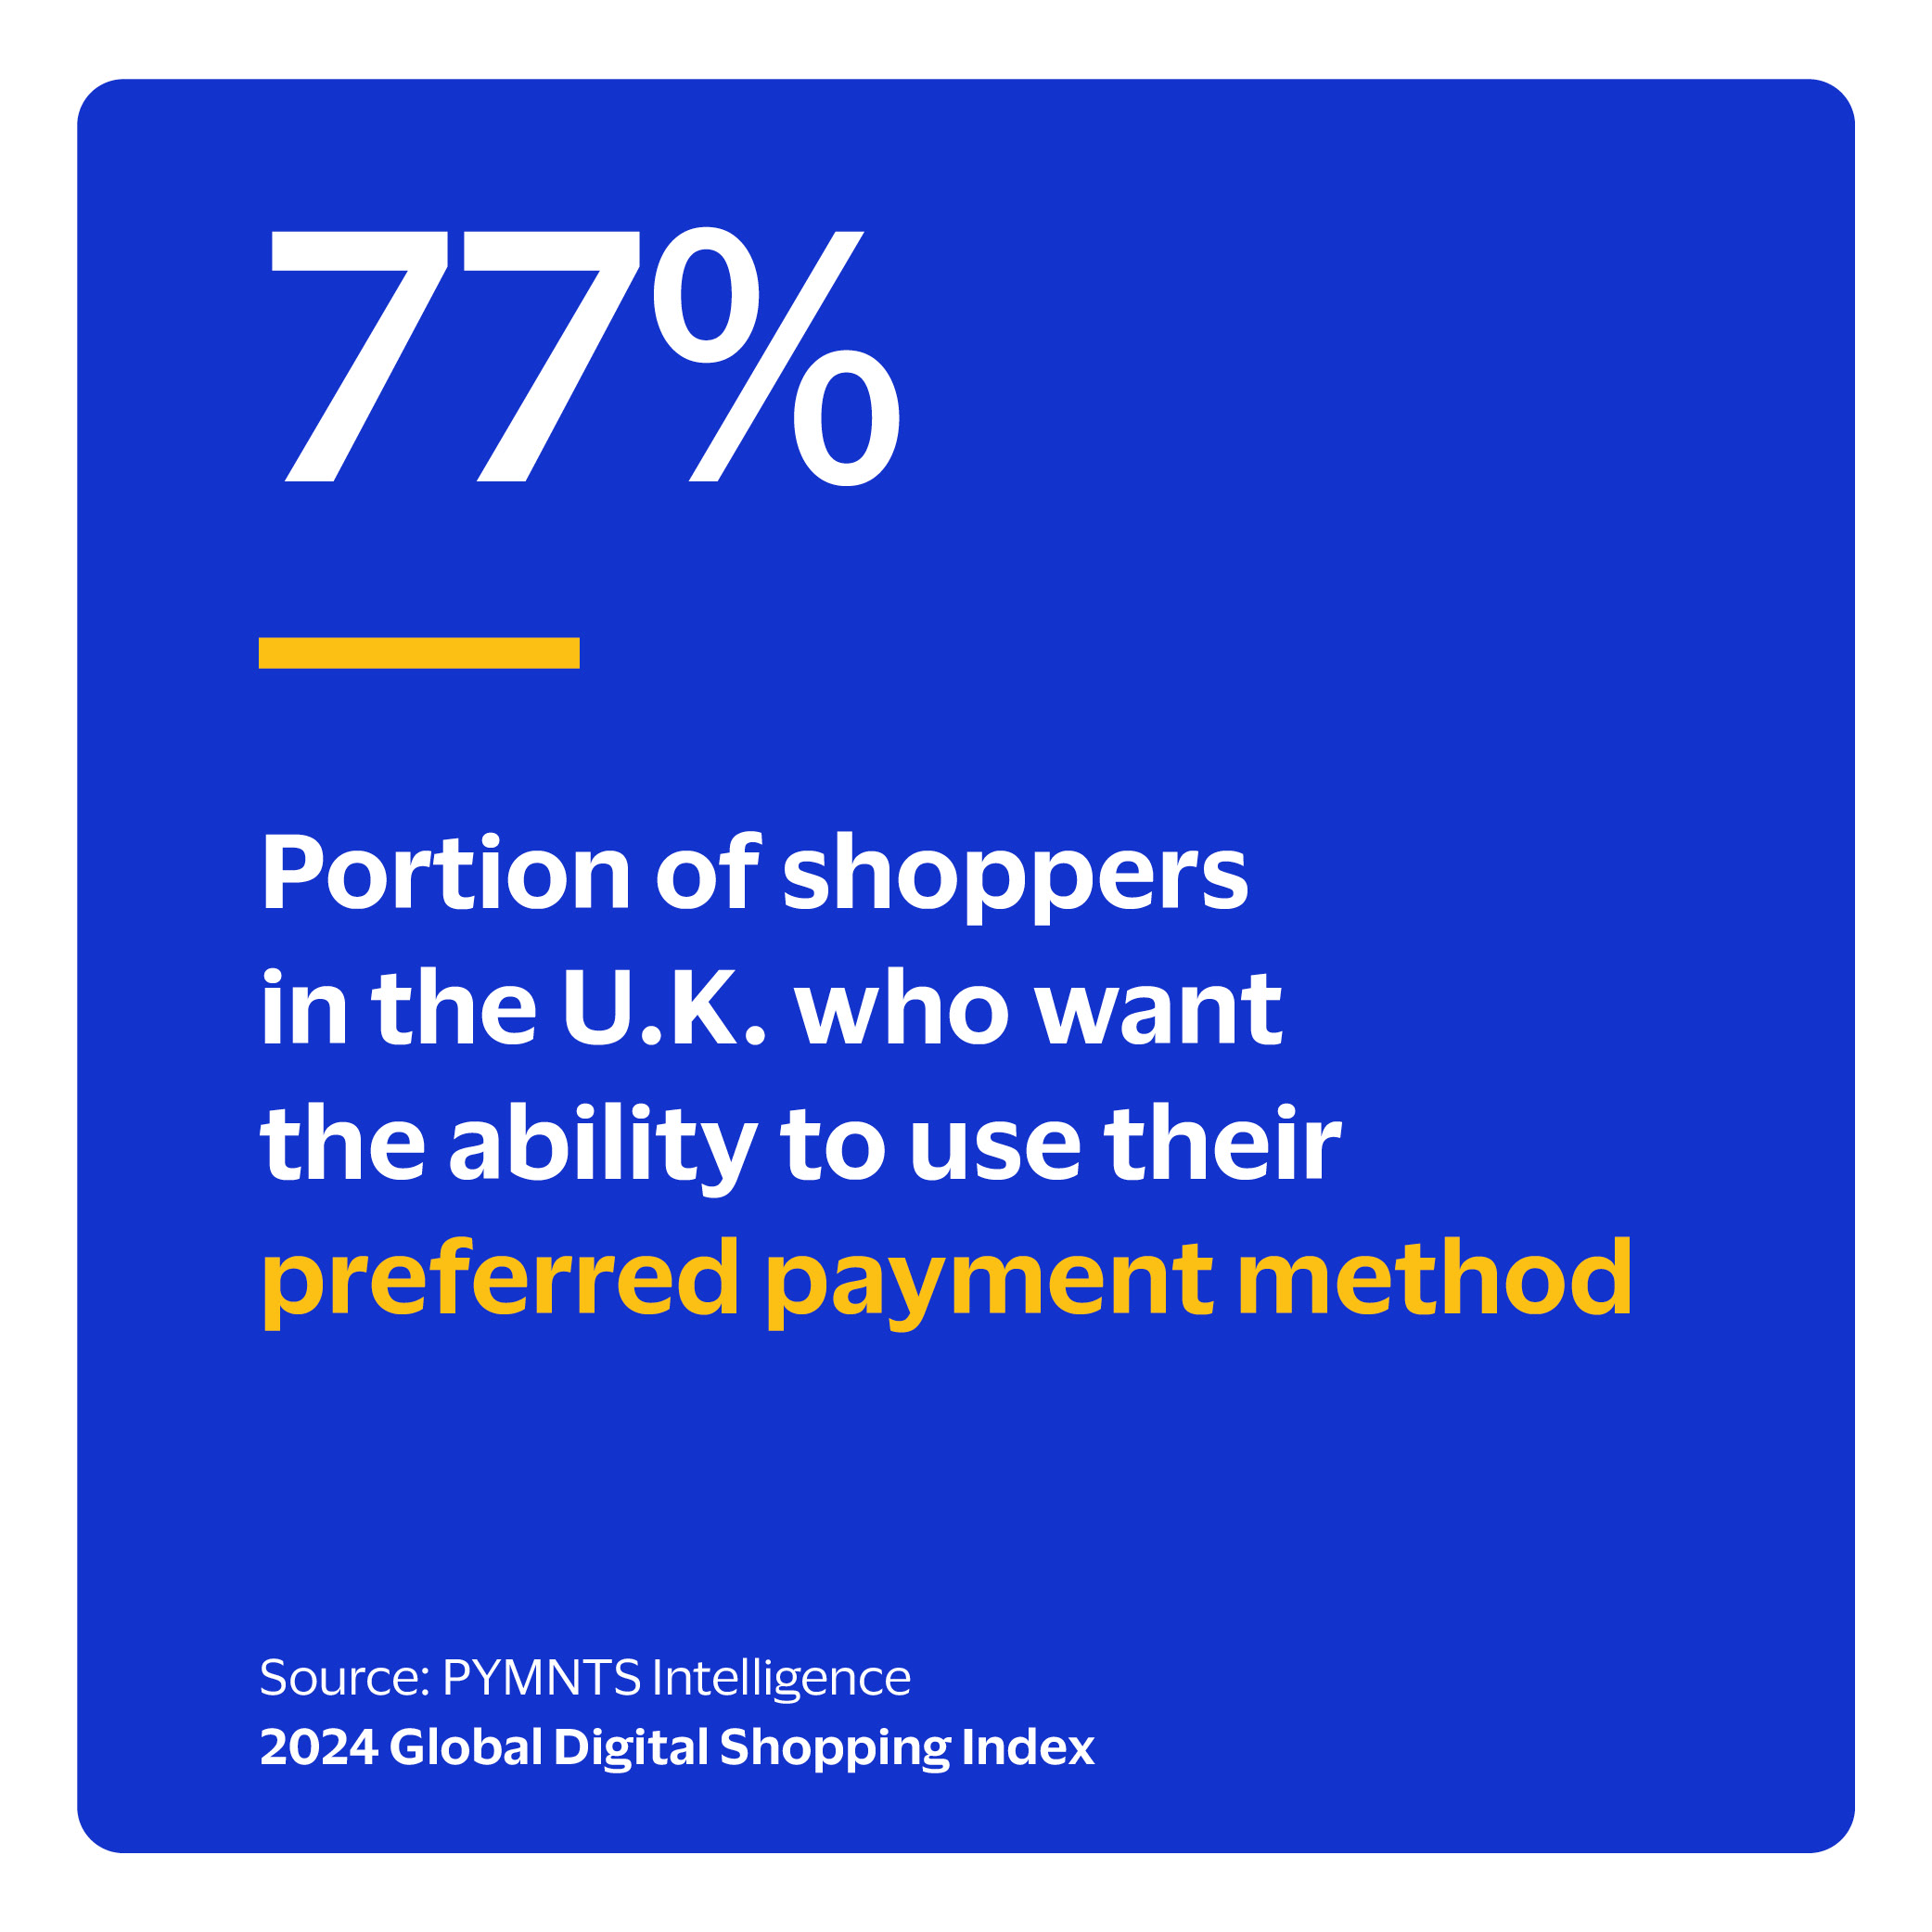  Portion of shoppers in the U.K. who want the ability to use their preferred payment method